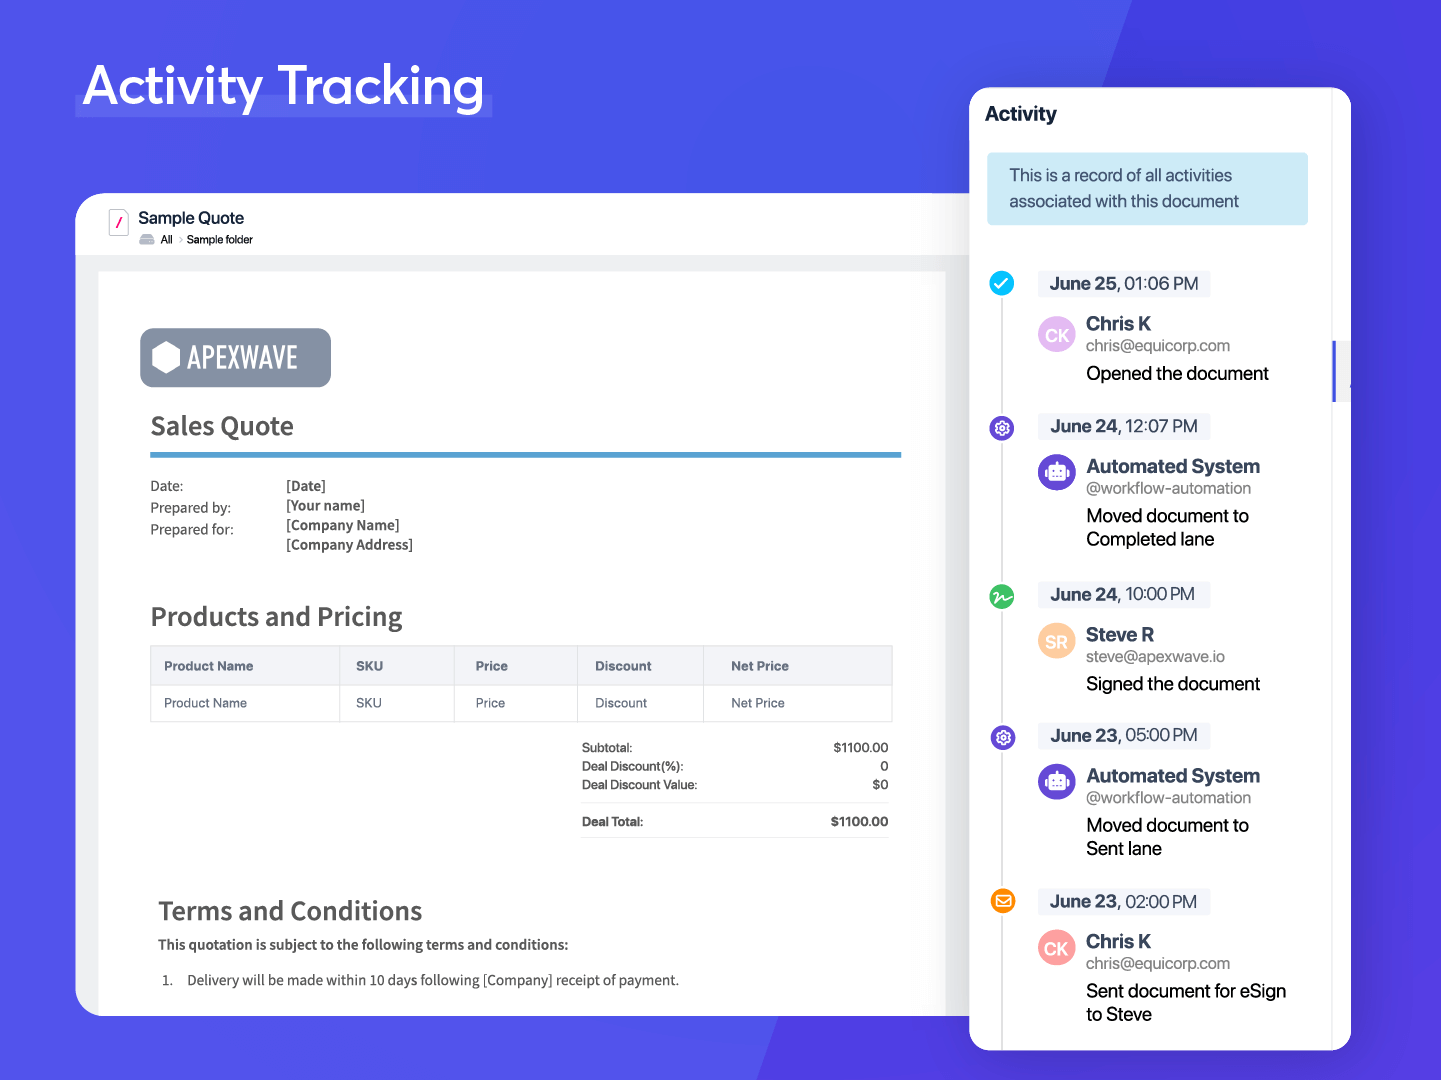 TRACK DOCUMENT ACTIVITY - All actions taken on the document get recorded along with a timestamp. Keep a track of how recipients are interacting with your documents - who opened the email, who viewed the document, and who signed it.